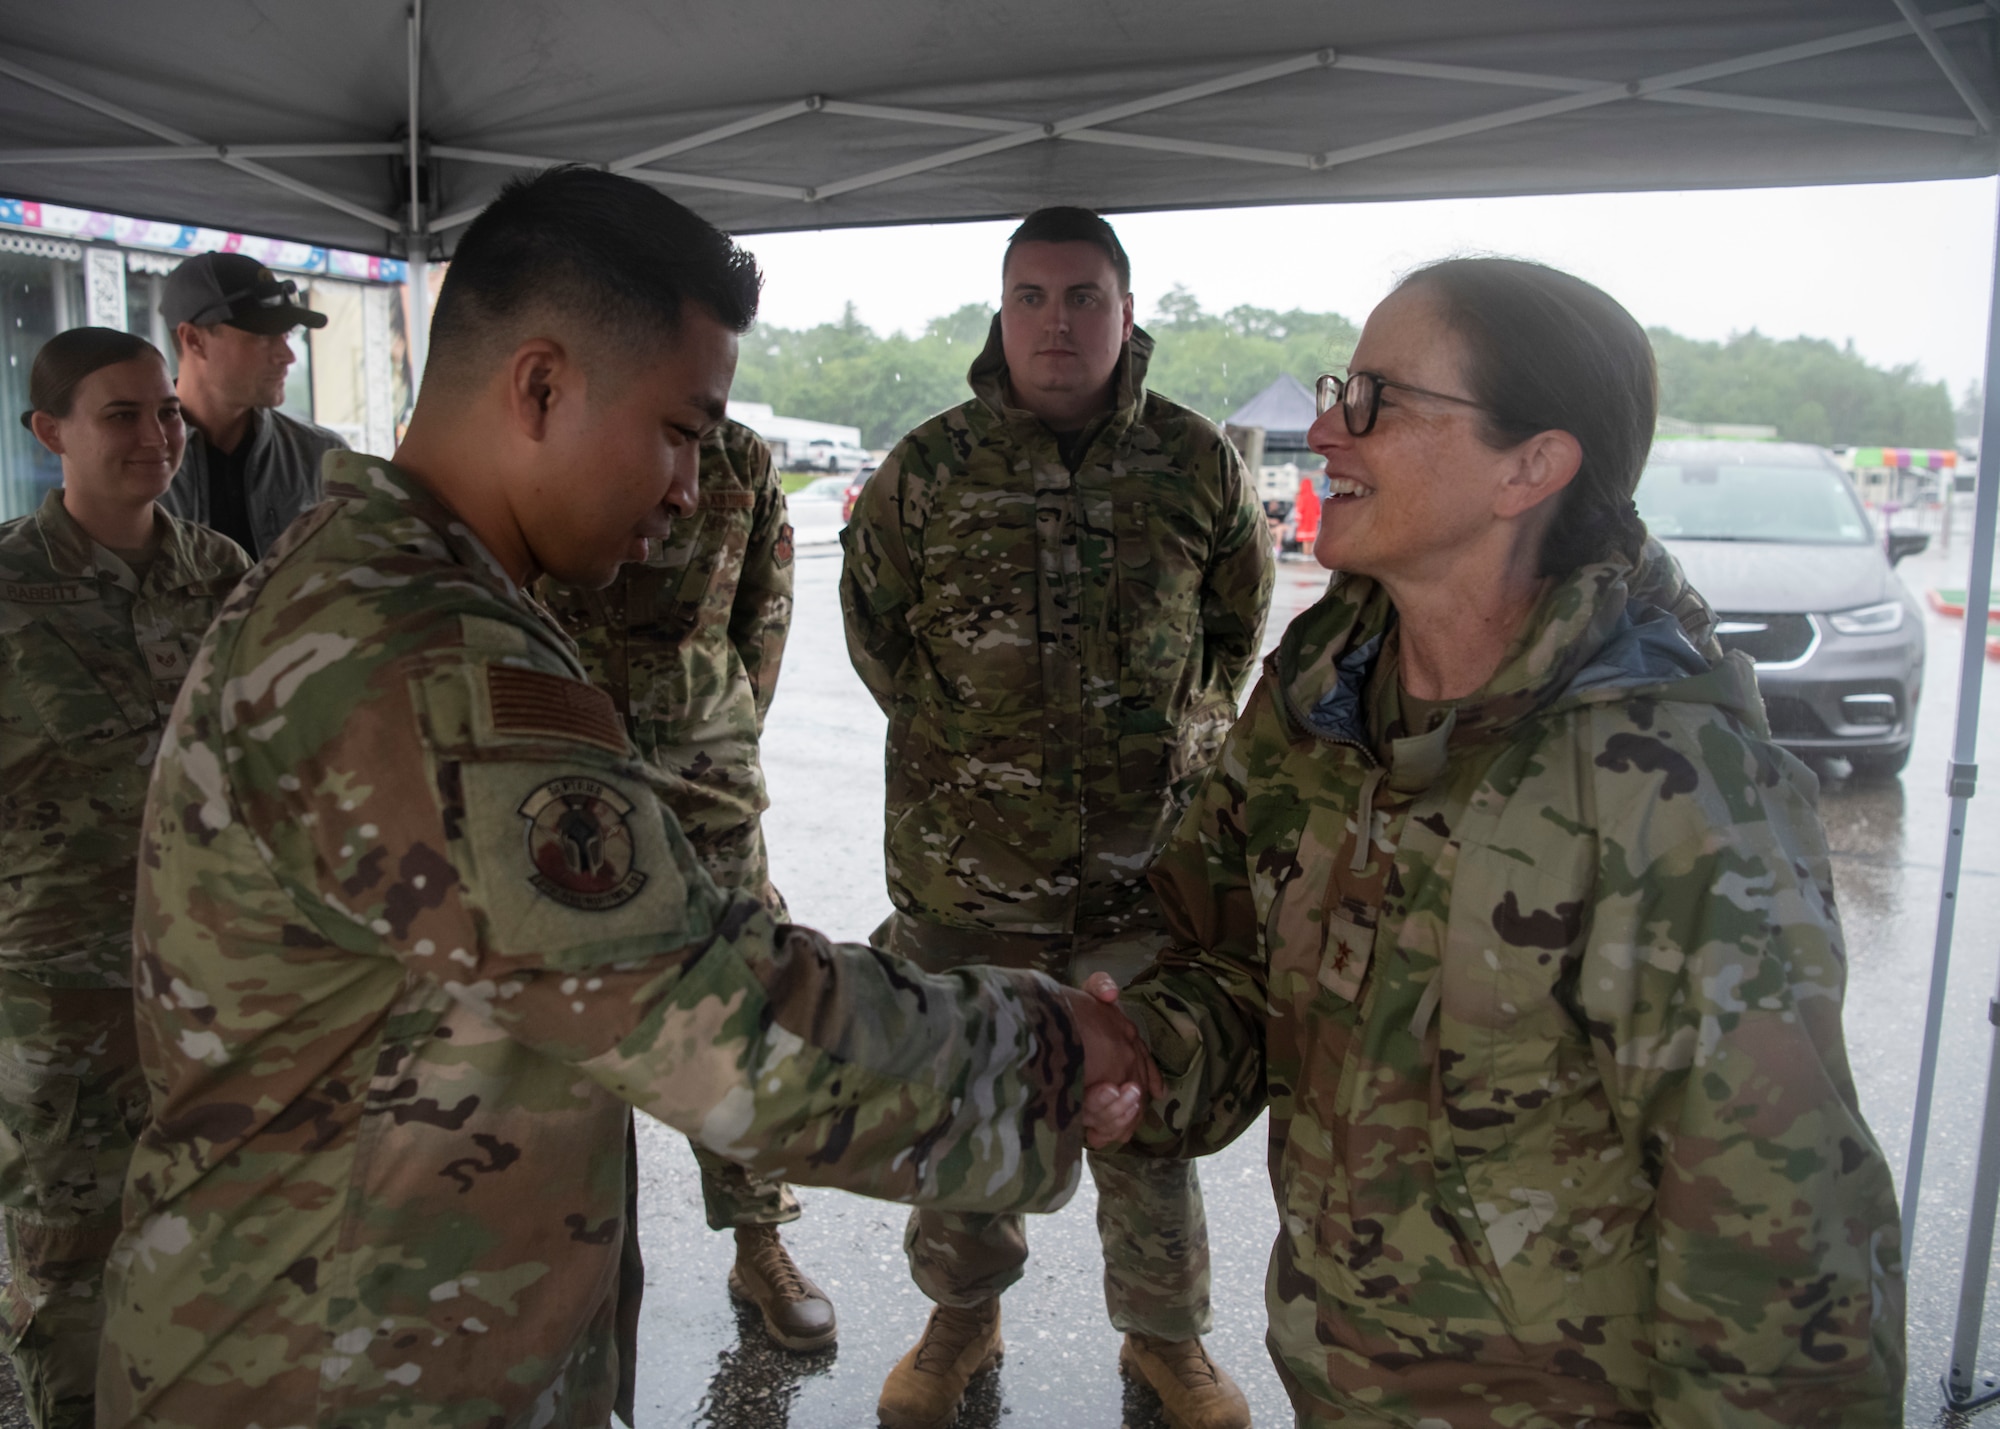 Two Airmen shake hands under a tent at New Hampshire Motor Speedway